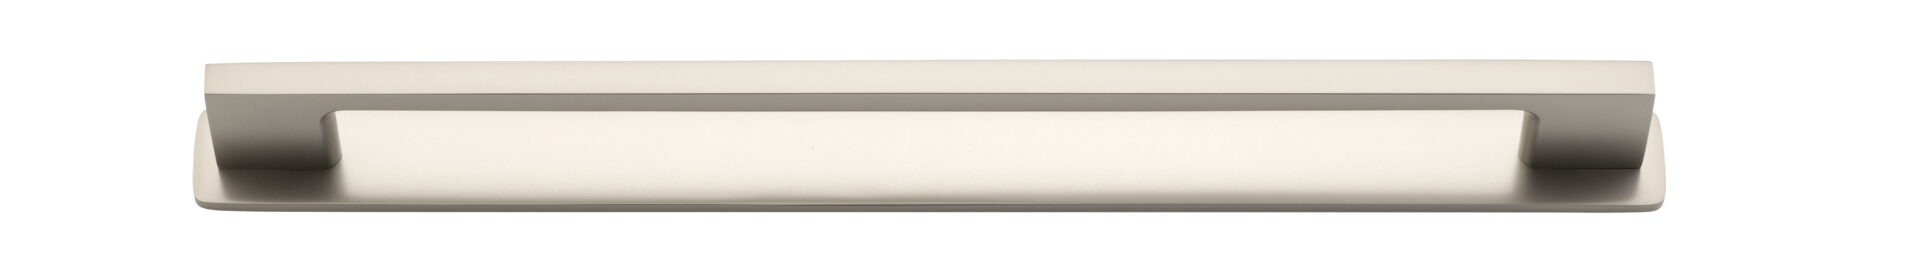 0553B - Cali Cabinet Pull with Backplate - CTC 256mm - Satin Nickel